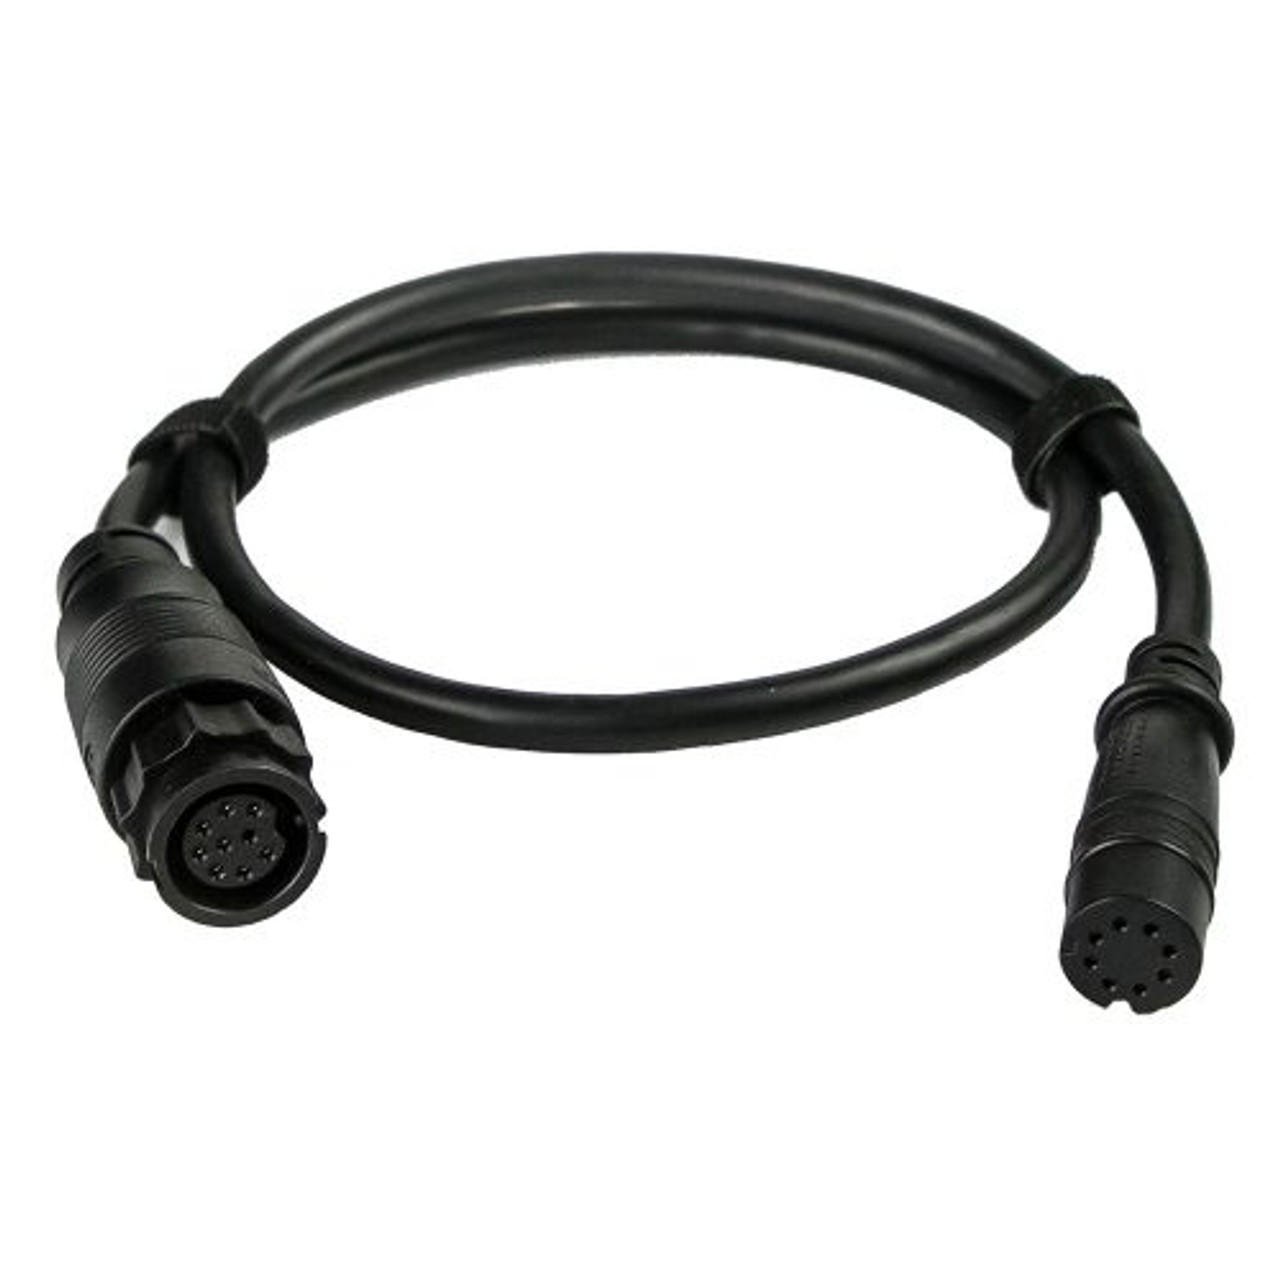 https://cdn11.bigcommerce.com/s-juamt7rae6/images/stencil/1280x1280/products/2172/2717/lowrance-xsonic-transducer-adapter-cable-to-hook2-e1522107654412__09346.1626800577.jpg?c=1?imbypass=on